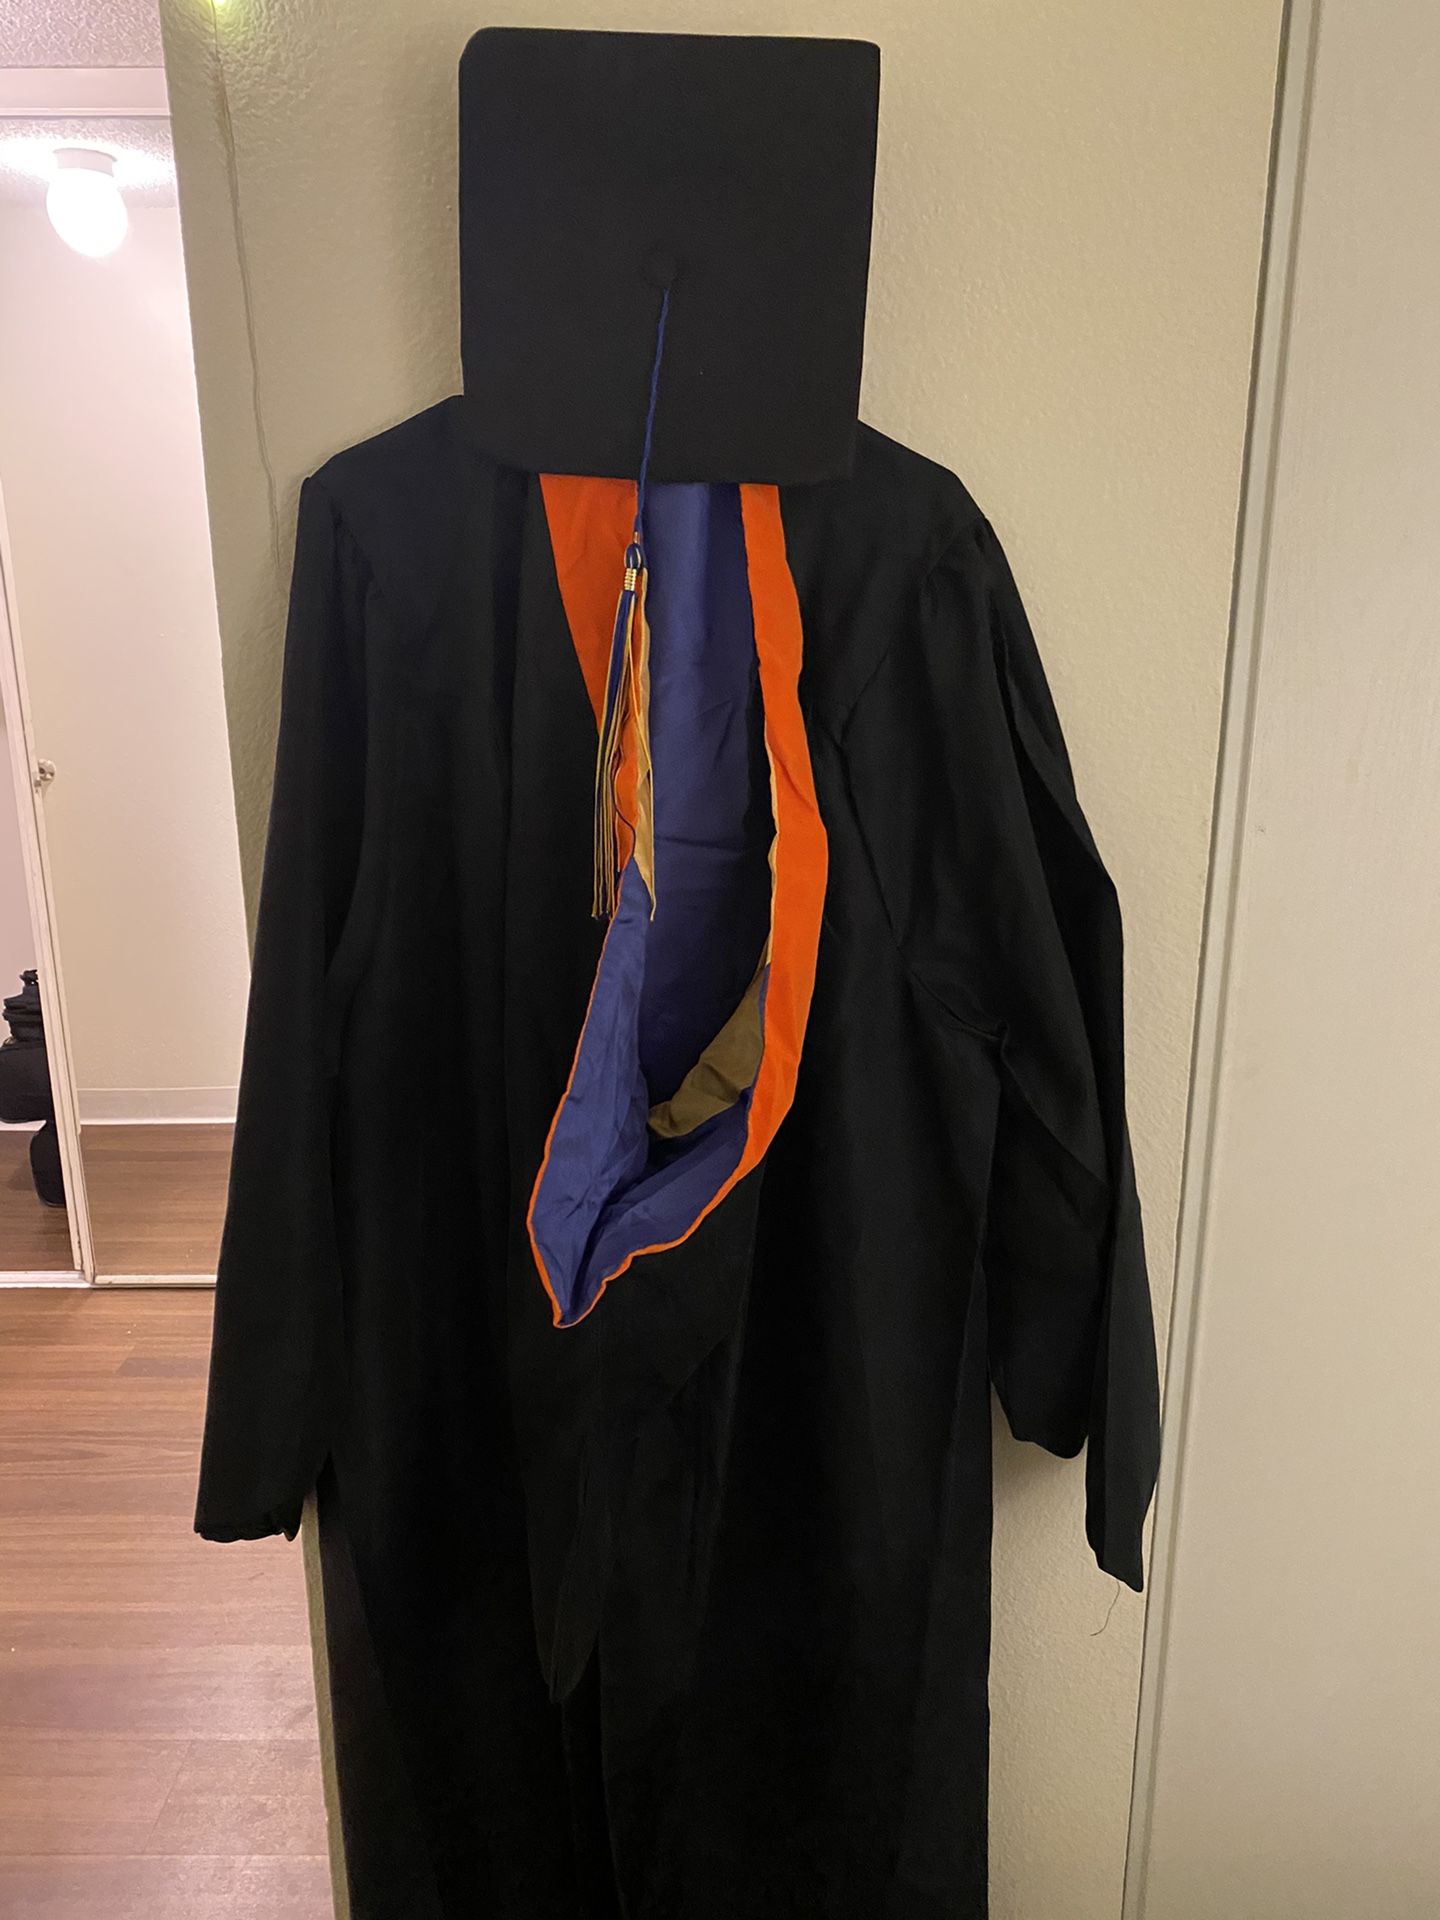 Graduation gown, hood and cap